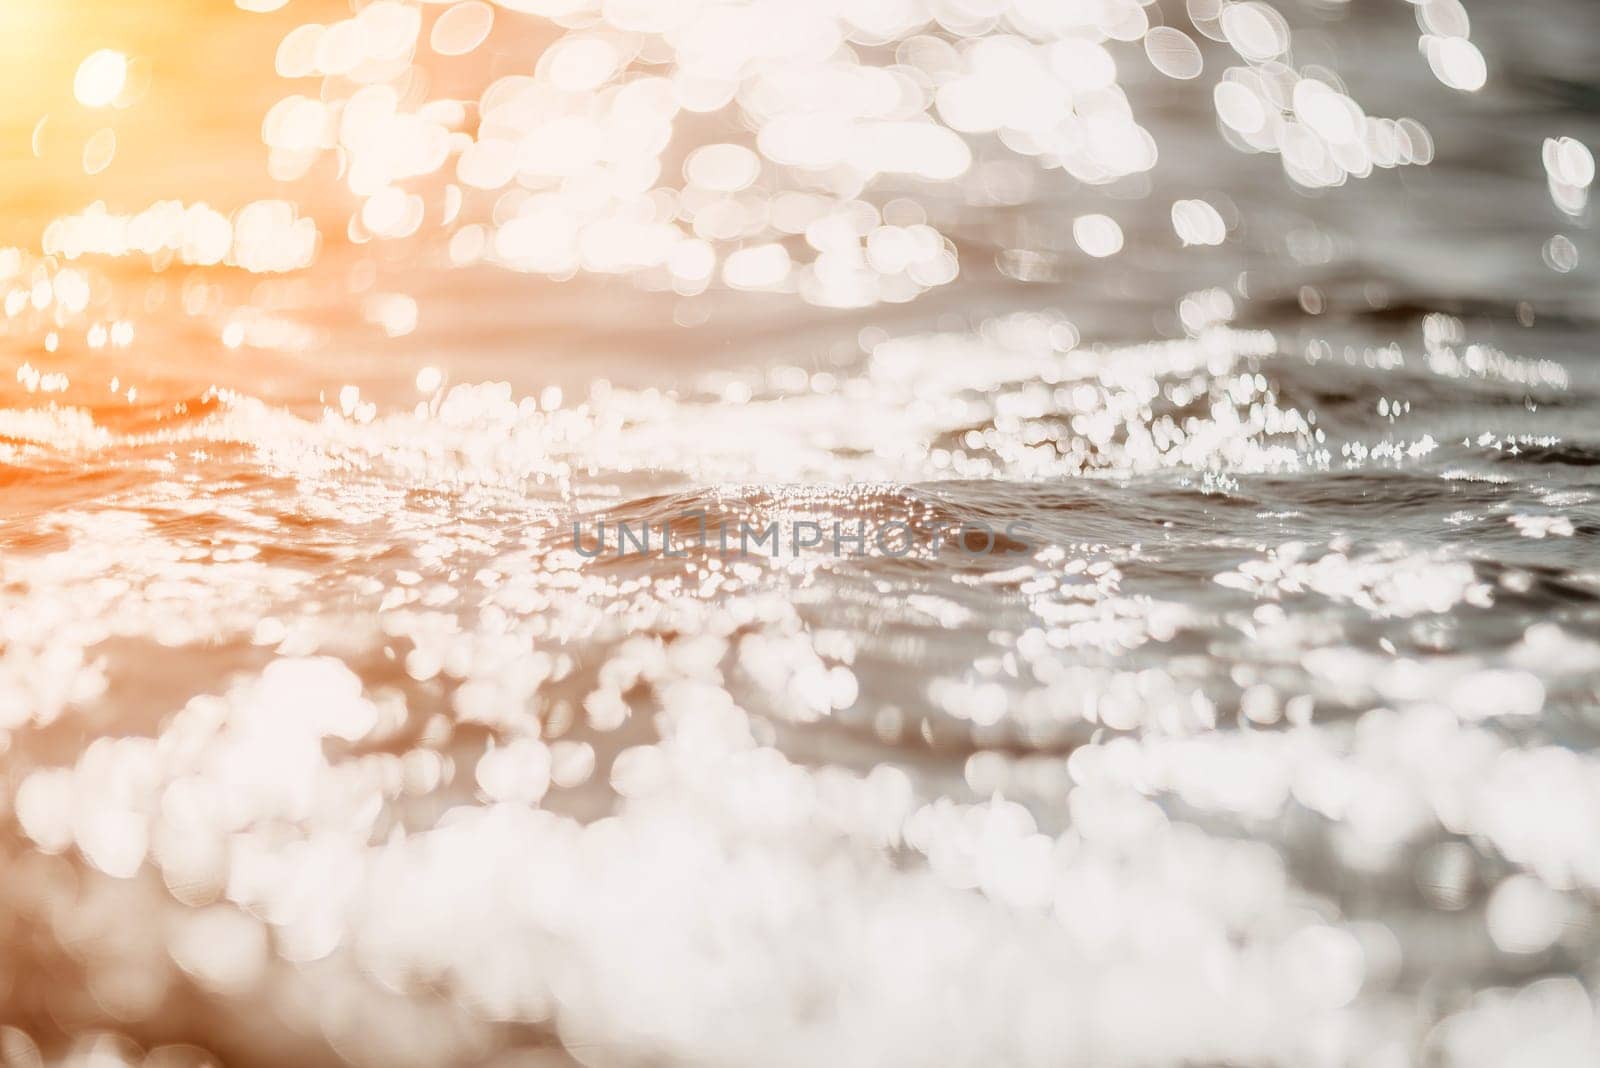 Abstract sea summer ocean sunset nature background. Sound of small waves on golden water surface in motion blur with golden bokeh lights from sun. Holiday, vacation and recreational concept.